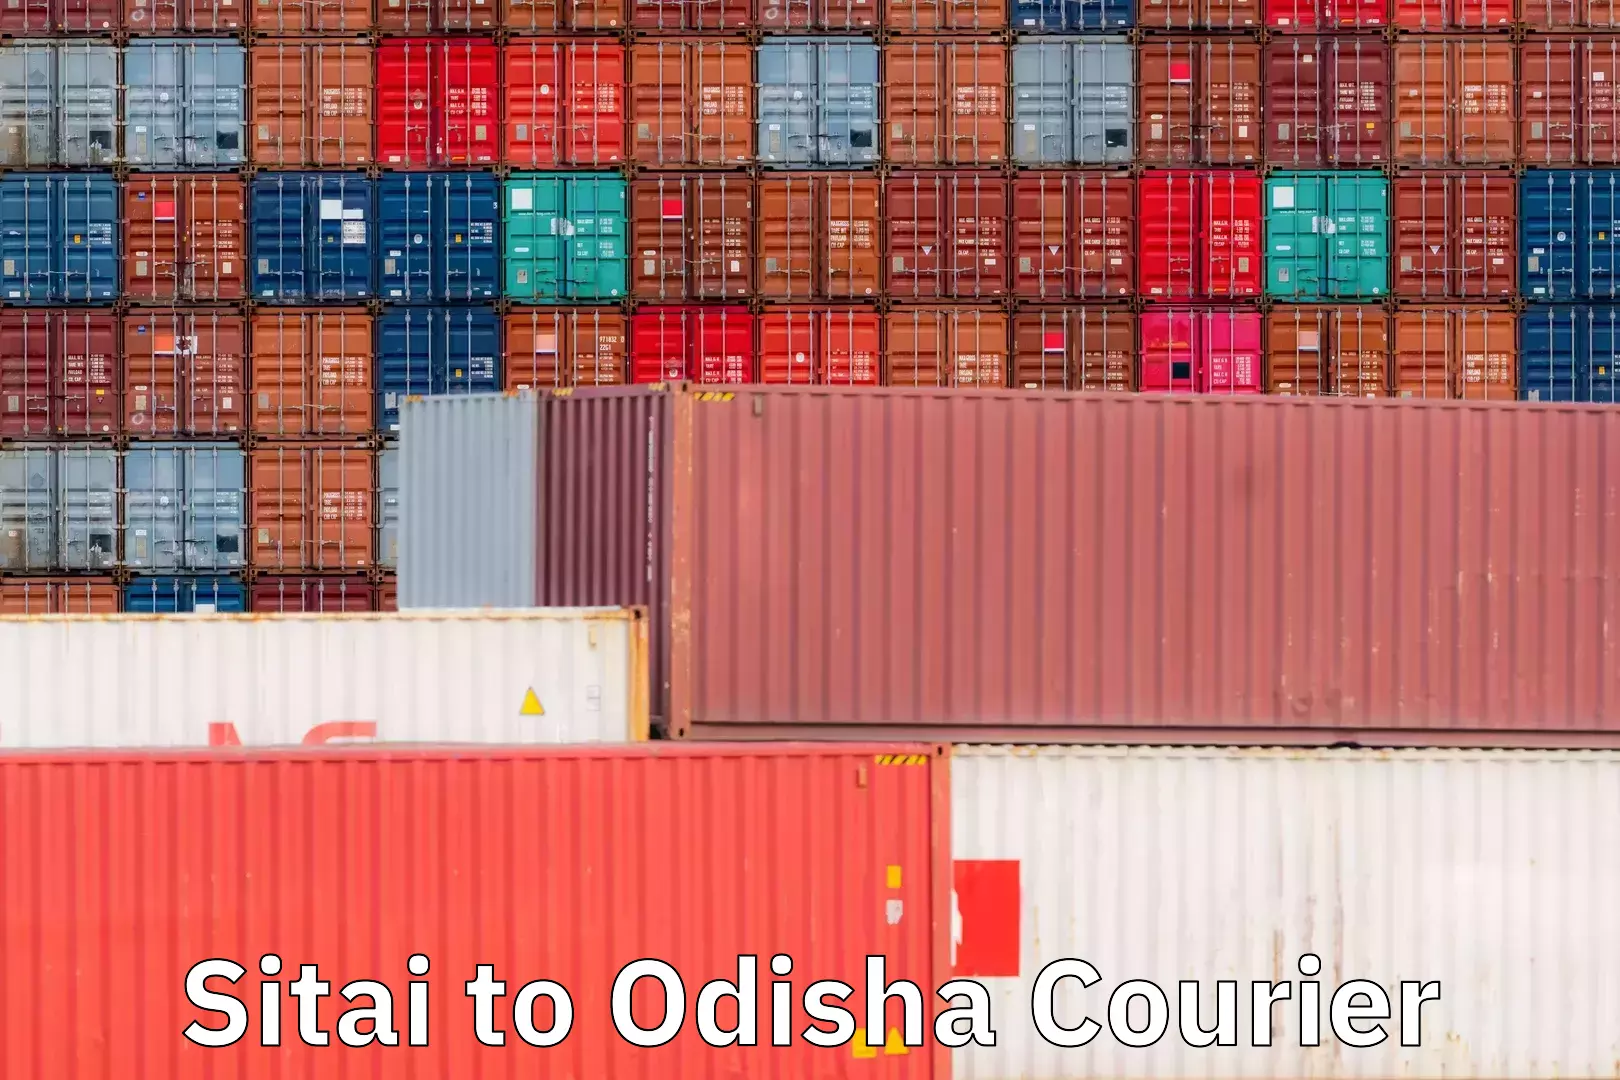 State-of-the-art courier technology Sitai to Odisha